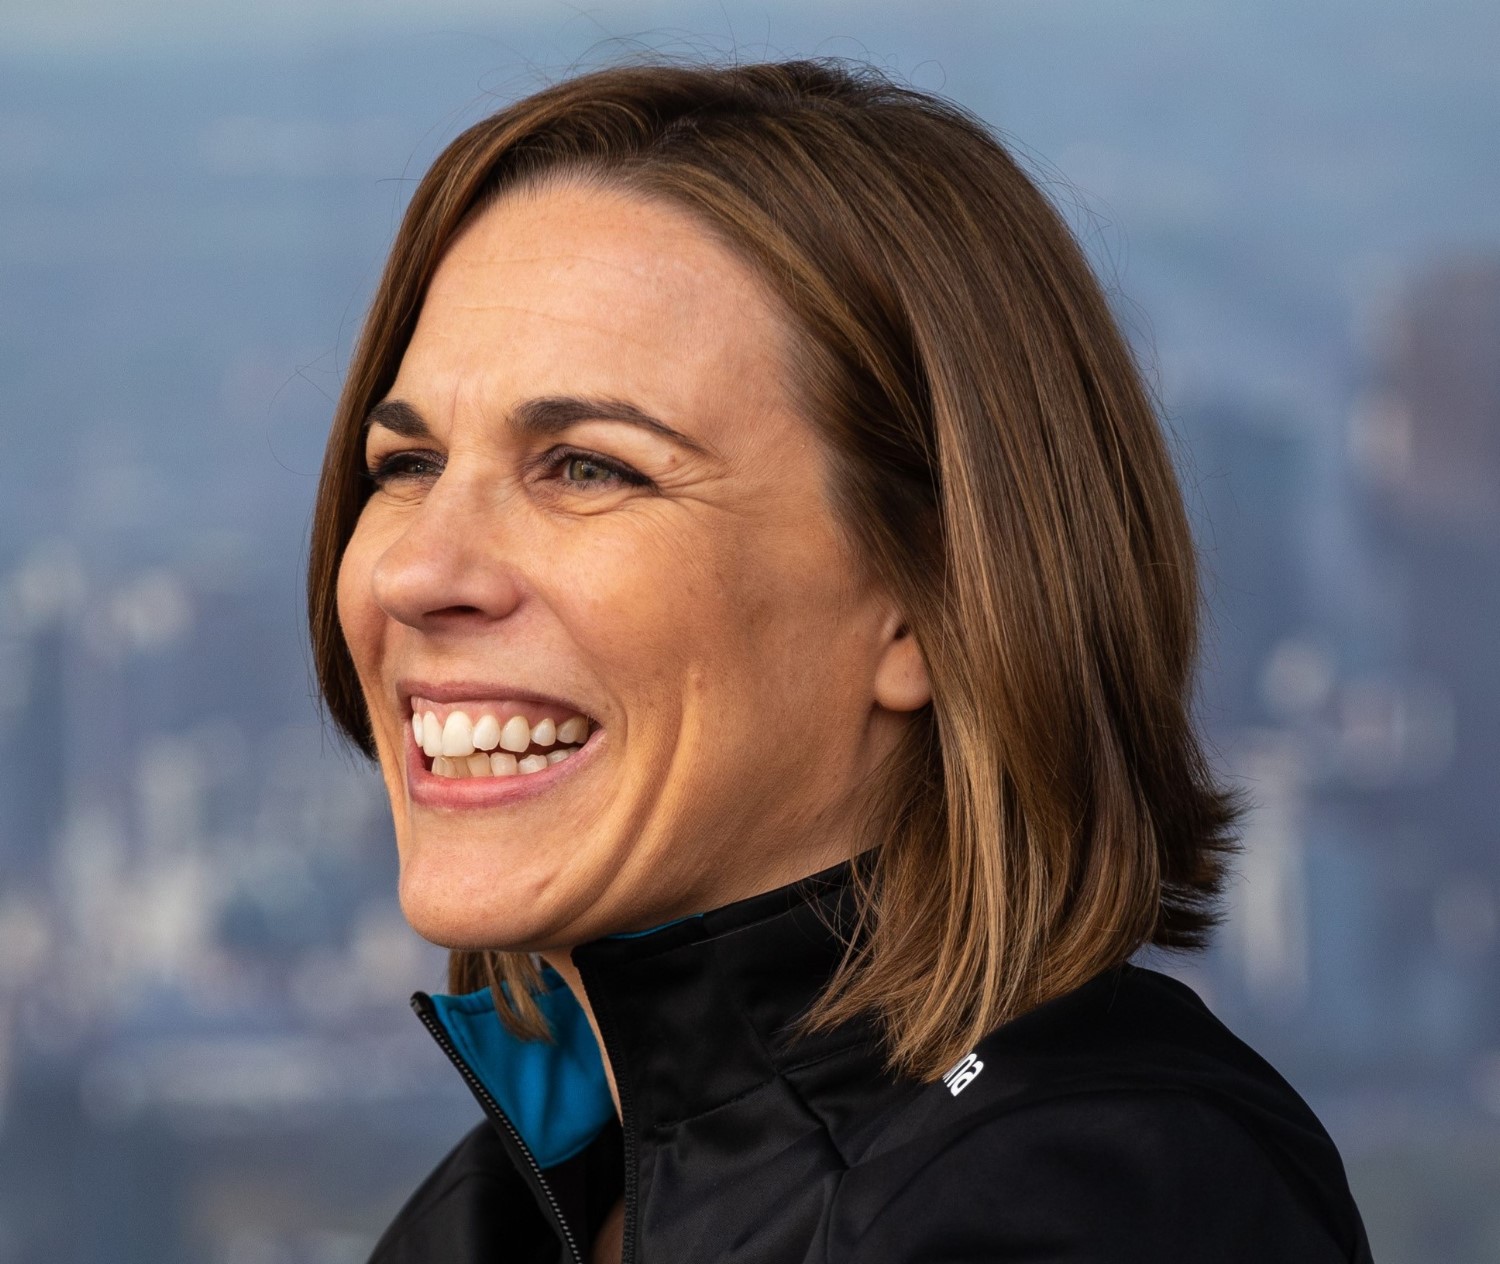 Claire Williams - is she the right person to run the team?